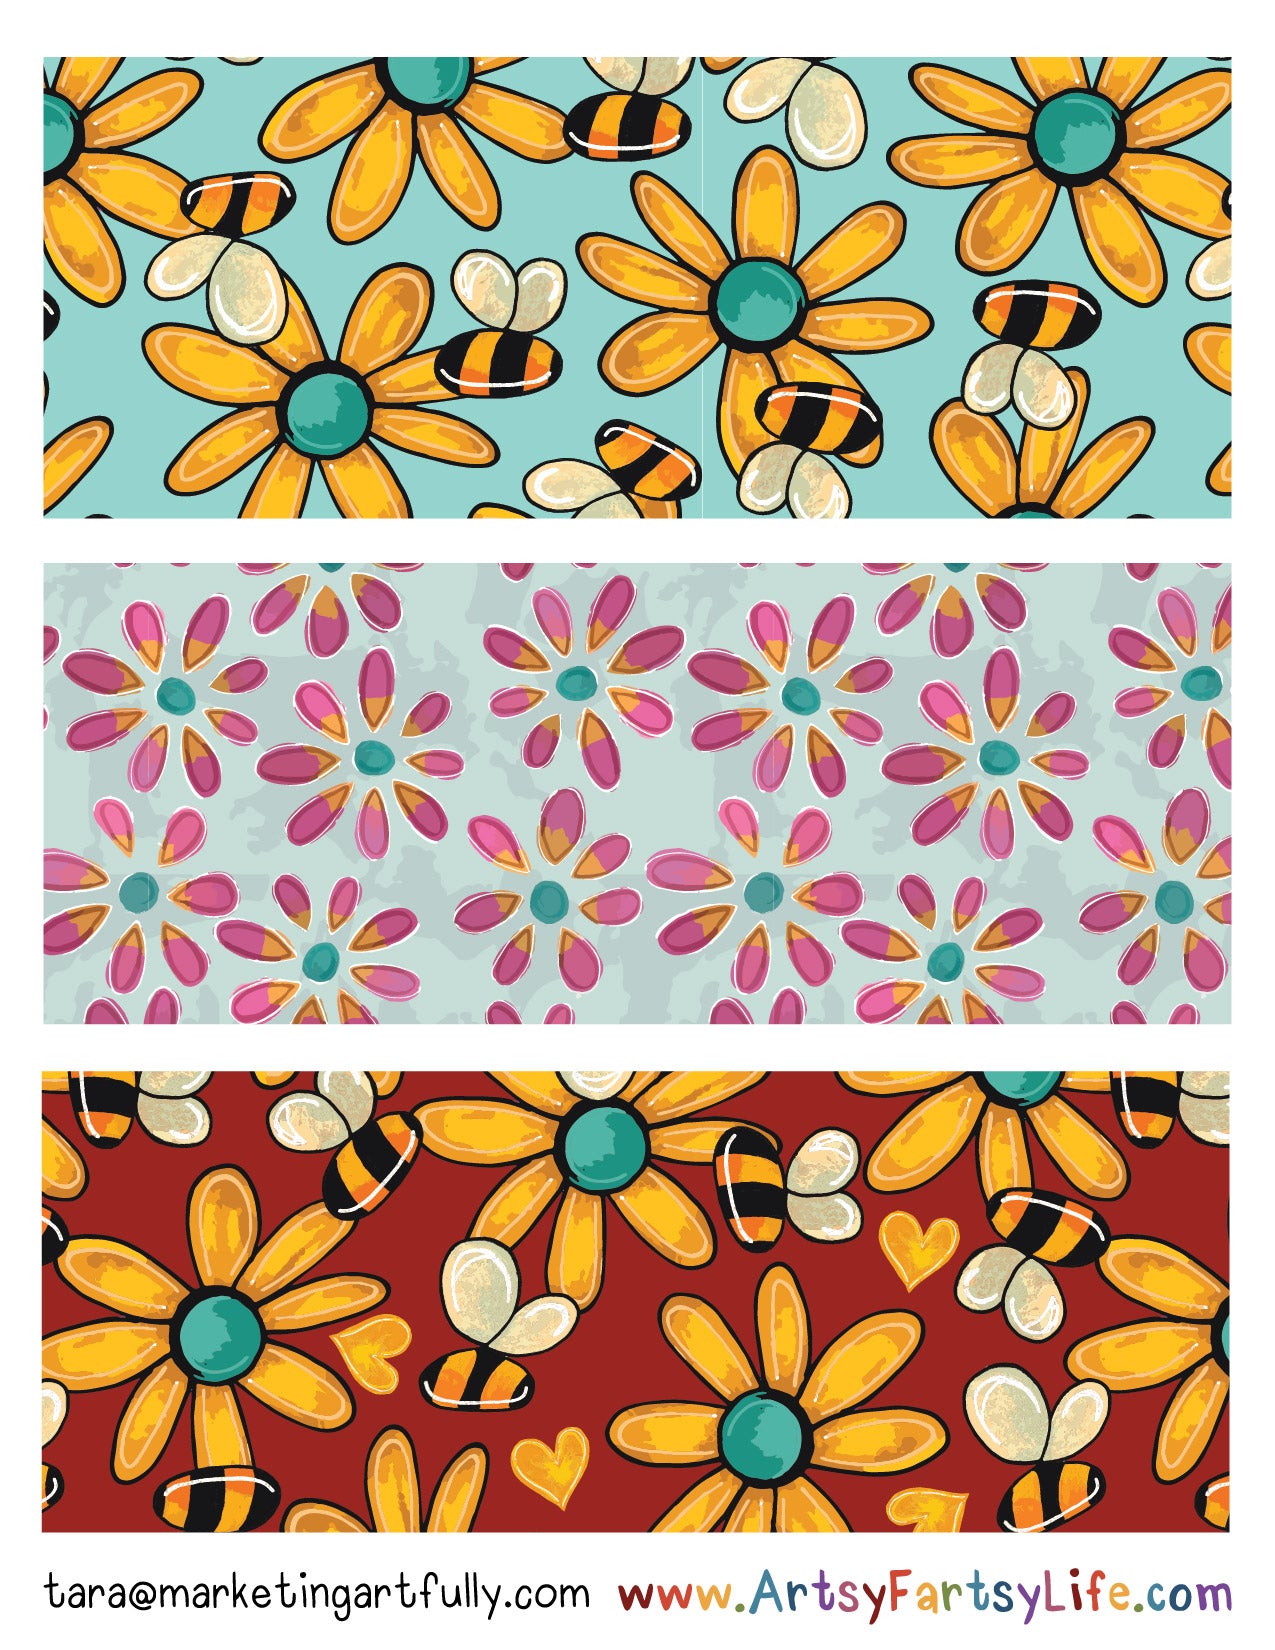 Lady Bee Bear Surface Design for Packaging